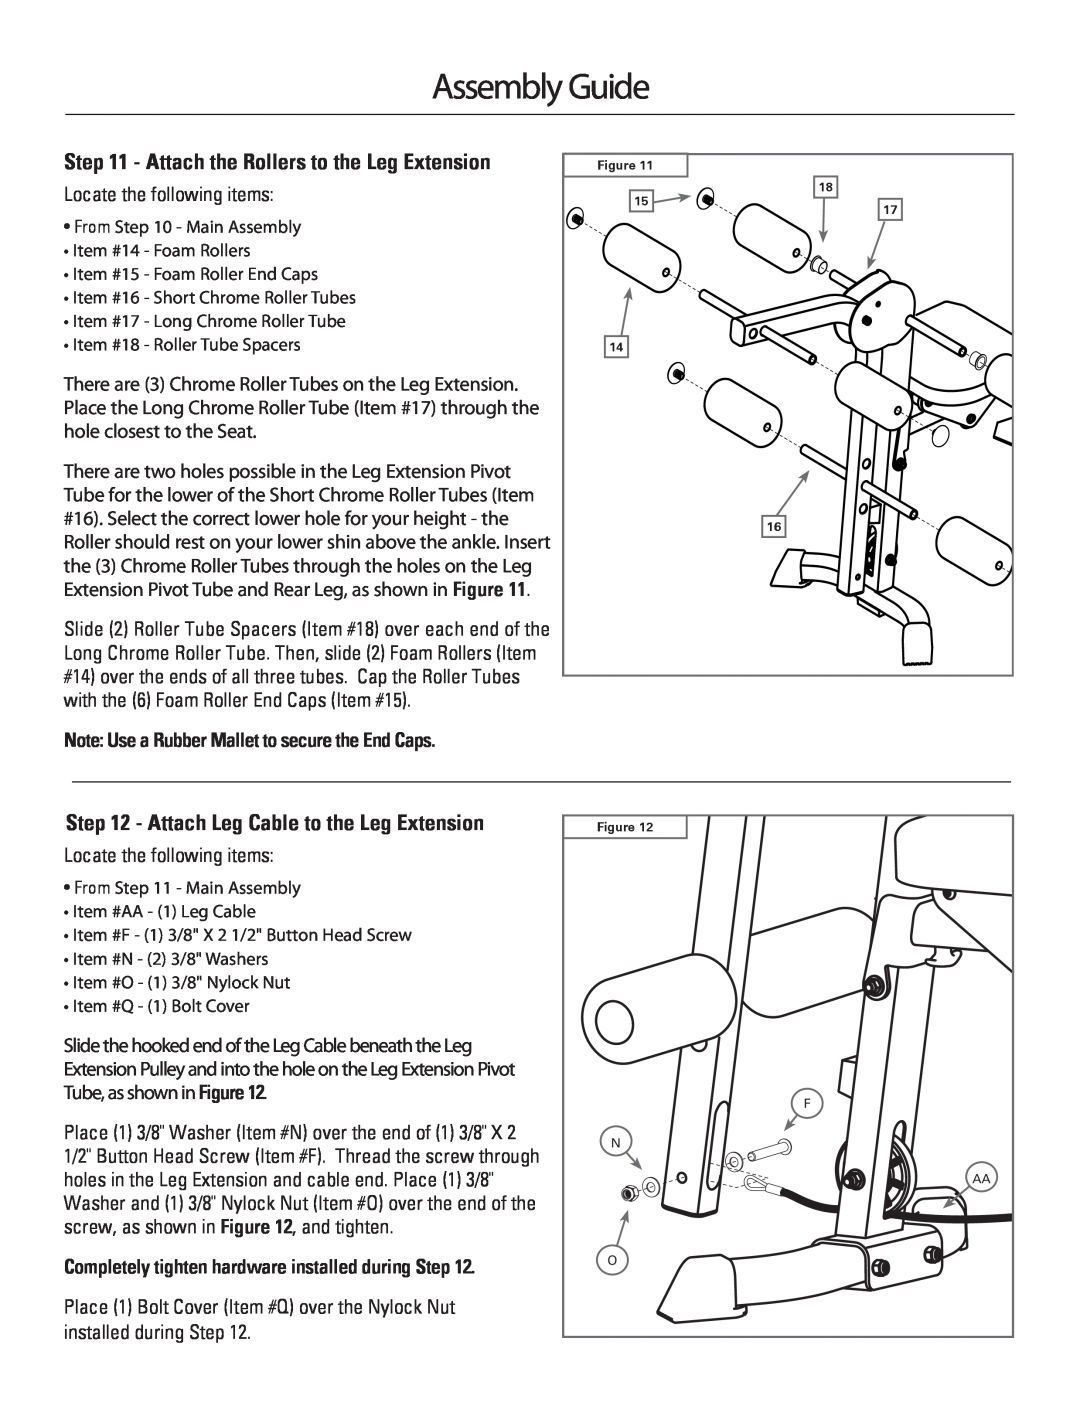 Bowflex 001-6961 Attach Leg Cable to the Leg Extension, Assembly Guide, Note Use a Rubber Mallet to secure the End Caps 